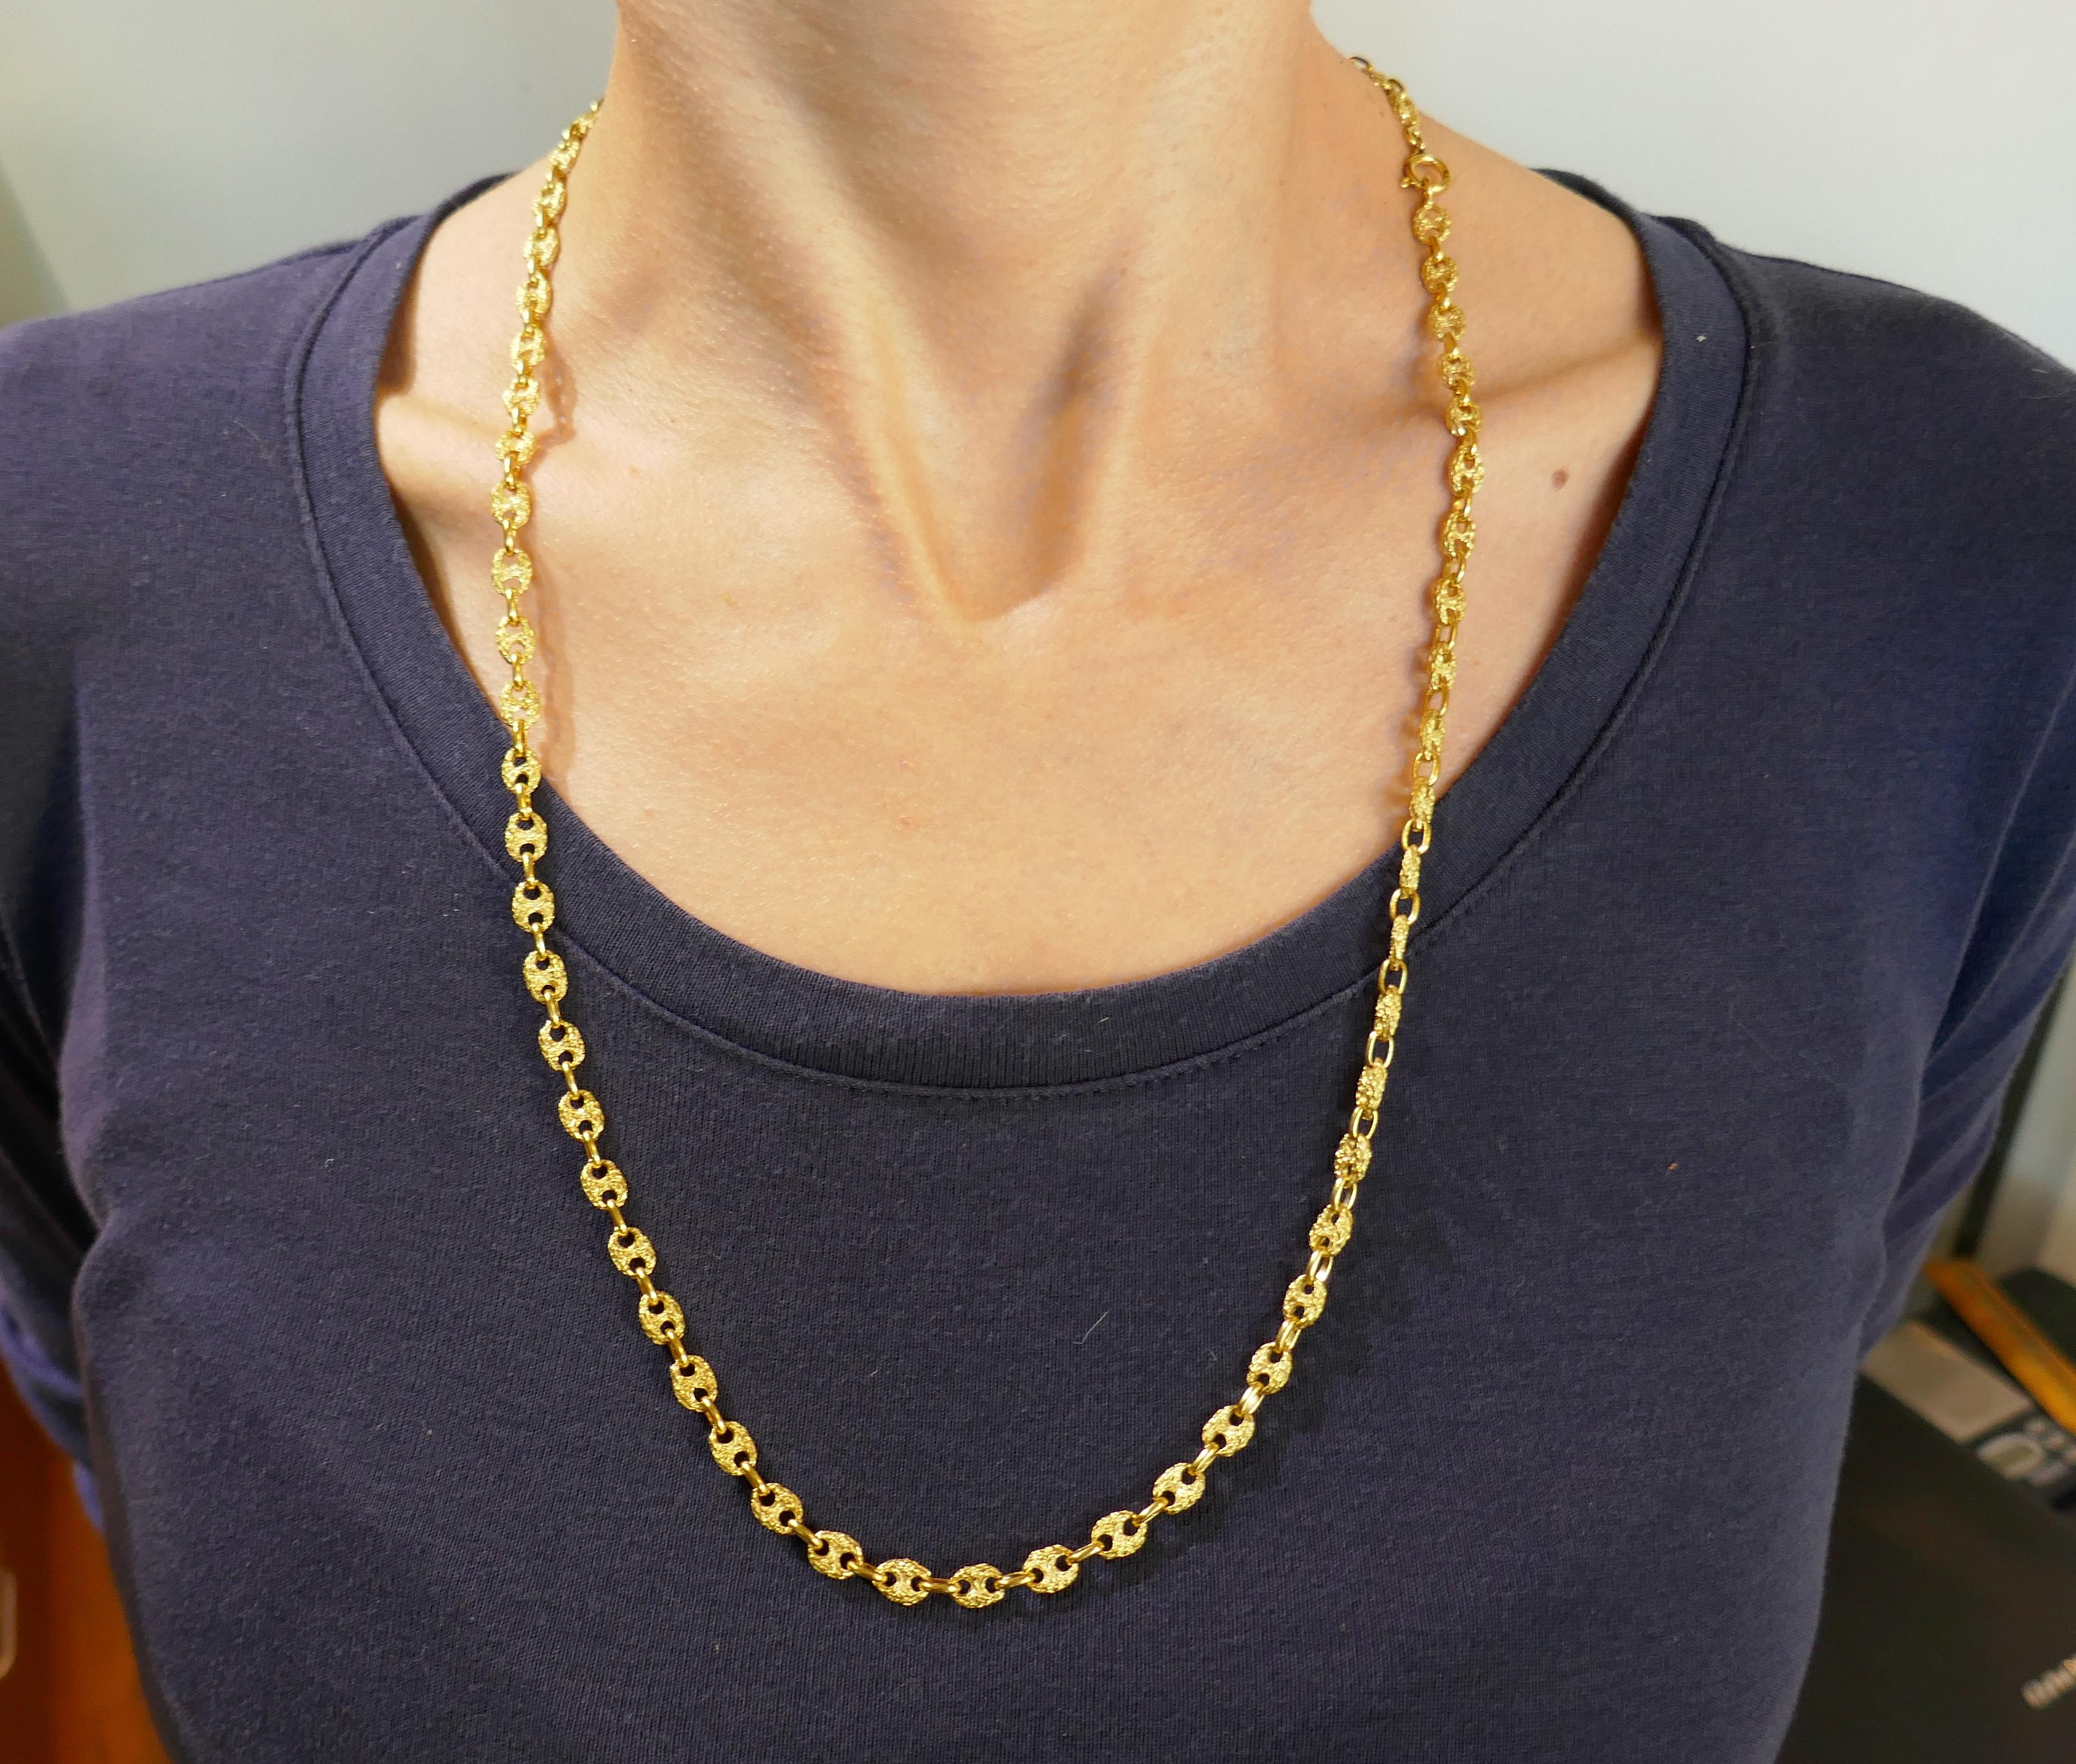 Textured chain necklace with a popular nautical link created in Italy in the 1970s. Elegant, and wearable, the necklace is a great addition to your jewelry collection.
The necklace is made of 18 karat yellow gold. 
It is 26 inches (66 centimeters)